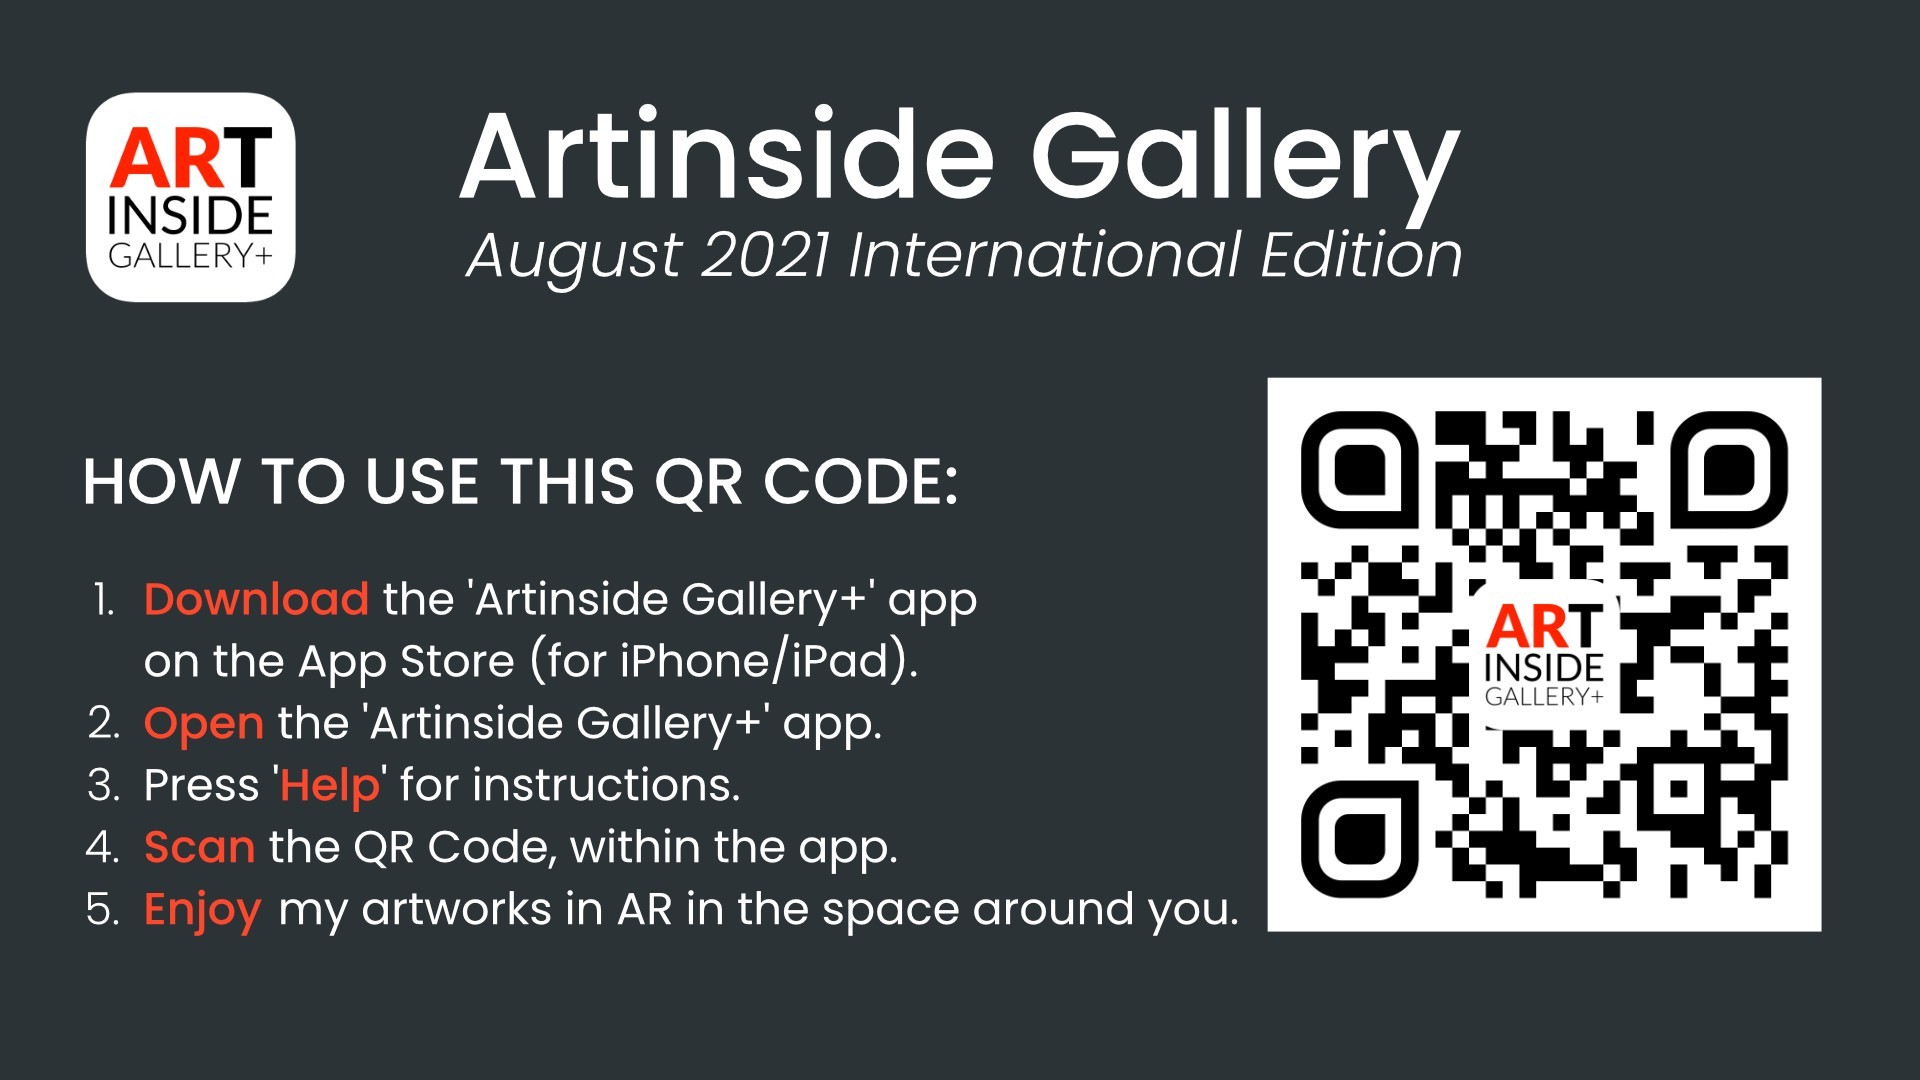 Artinside Gallery Plus Augmented Reality August